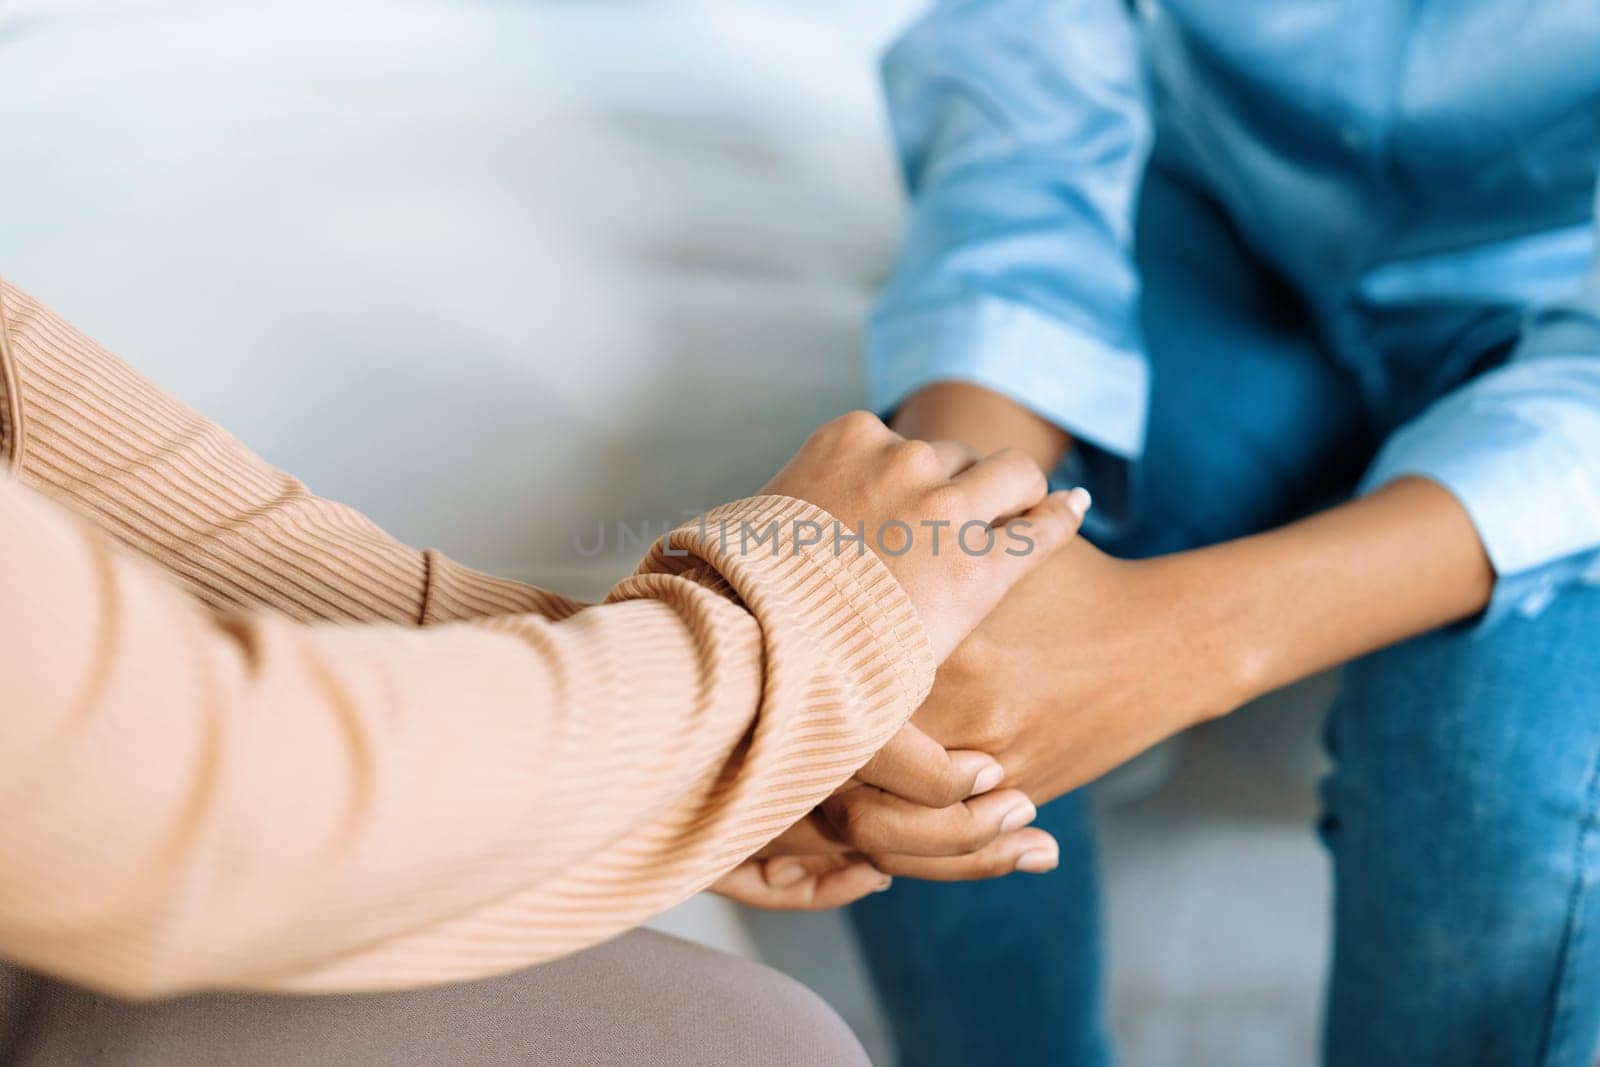 Close up shot of supportive and comforting hands for crucial empathy by biancoblue